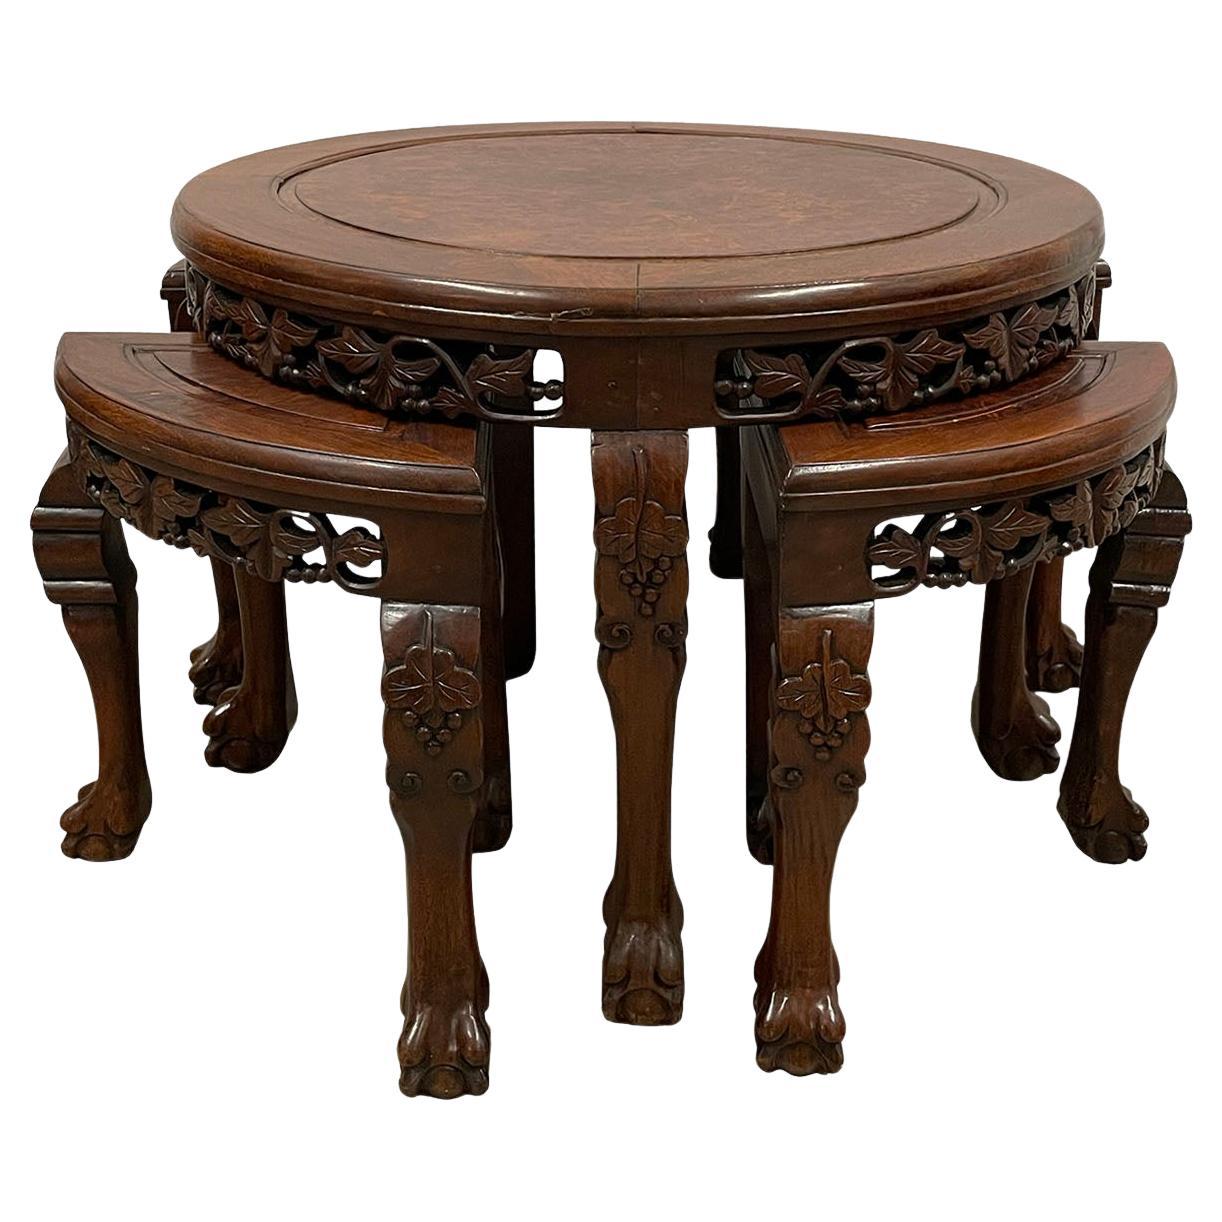 Antique Chinese Rosewood with Burl Wood Top Coffee Table and 4 Nesting stools